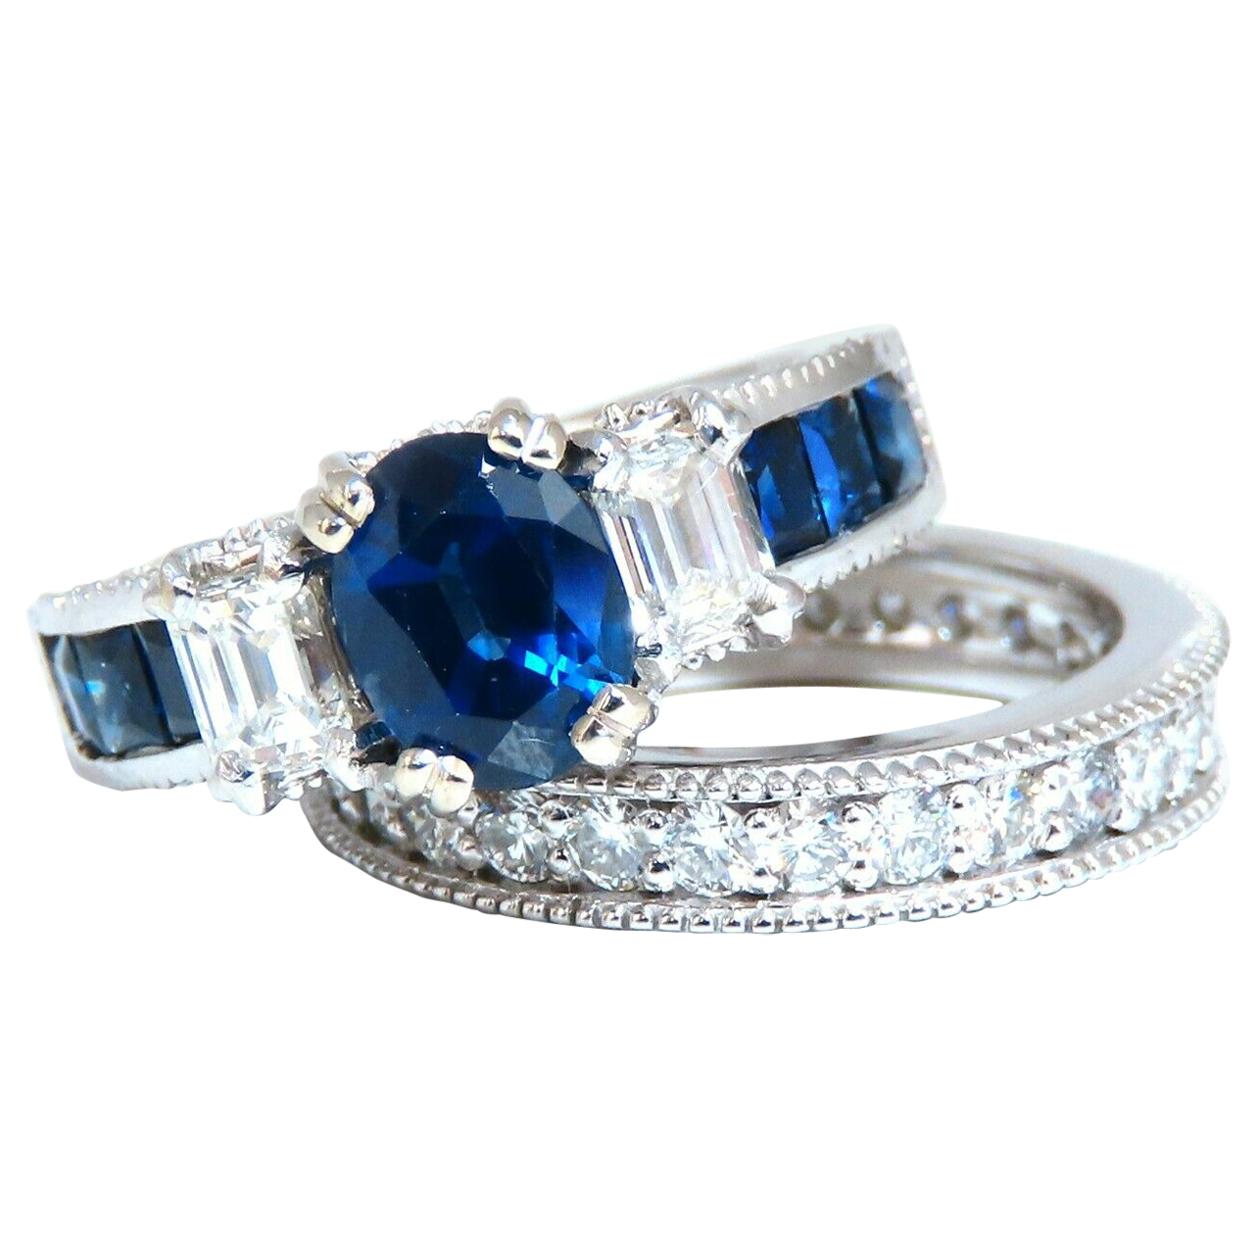 GIA Certified 1.86 Carat Natural Sapphire Diamonds Ring & Matching Eternity Band For Sale